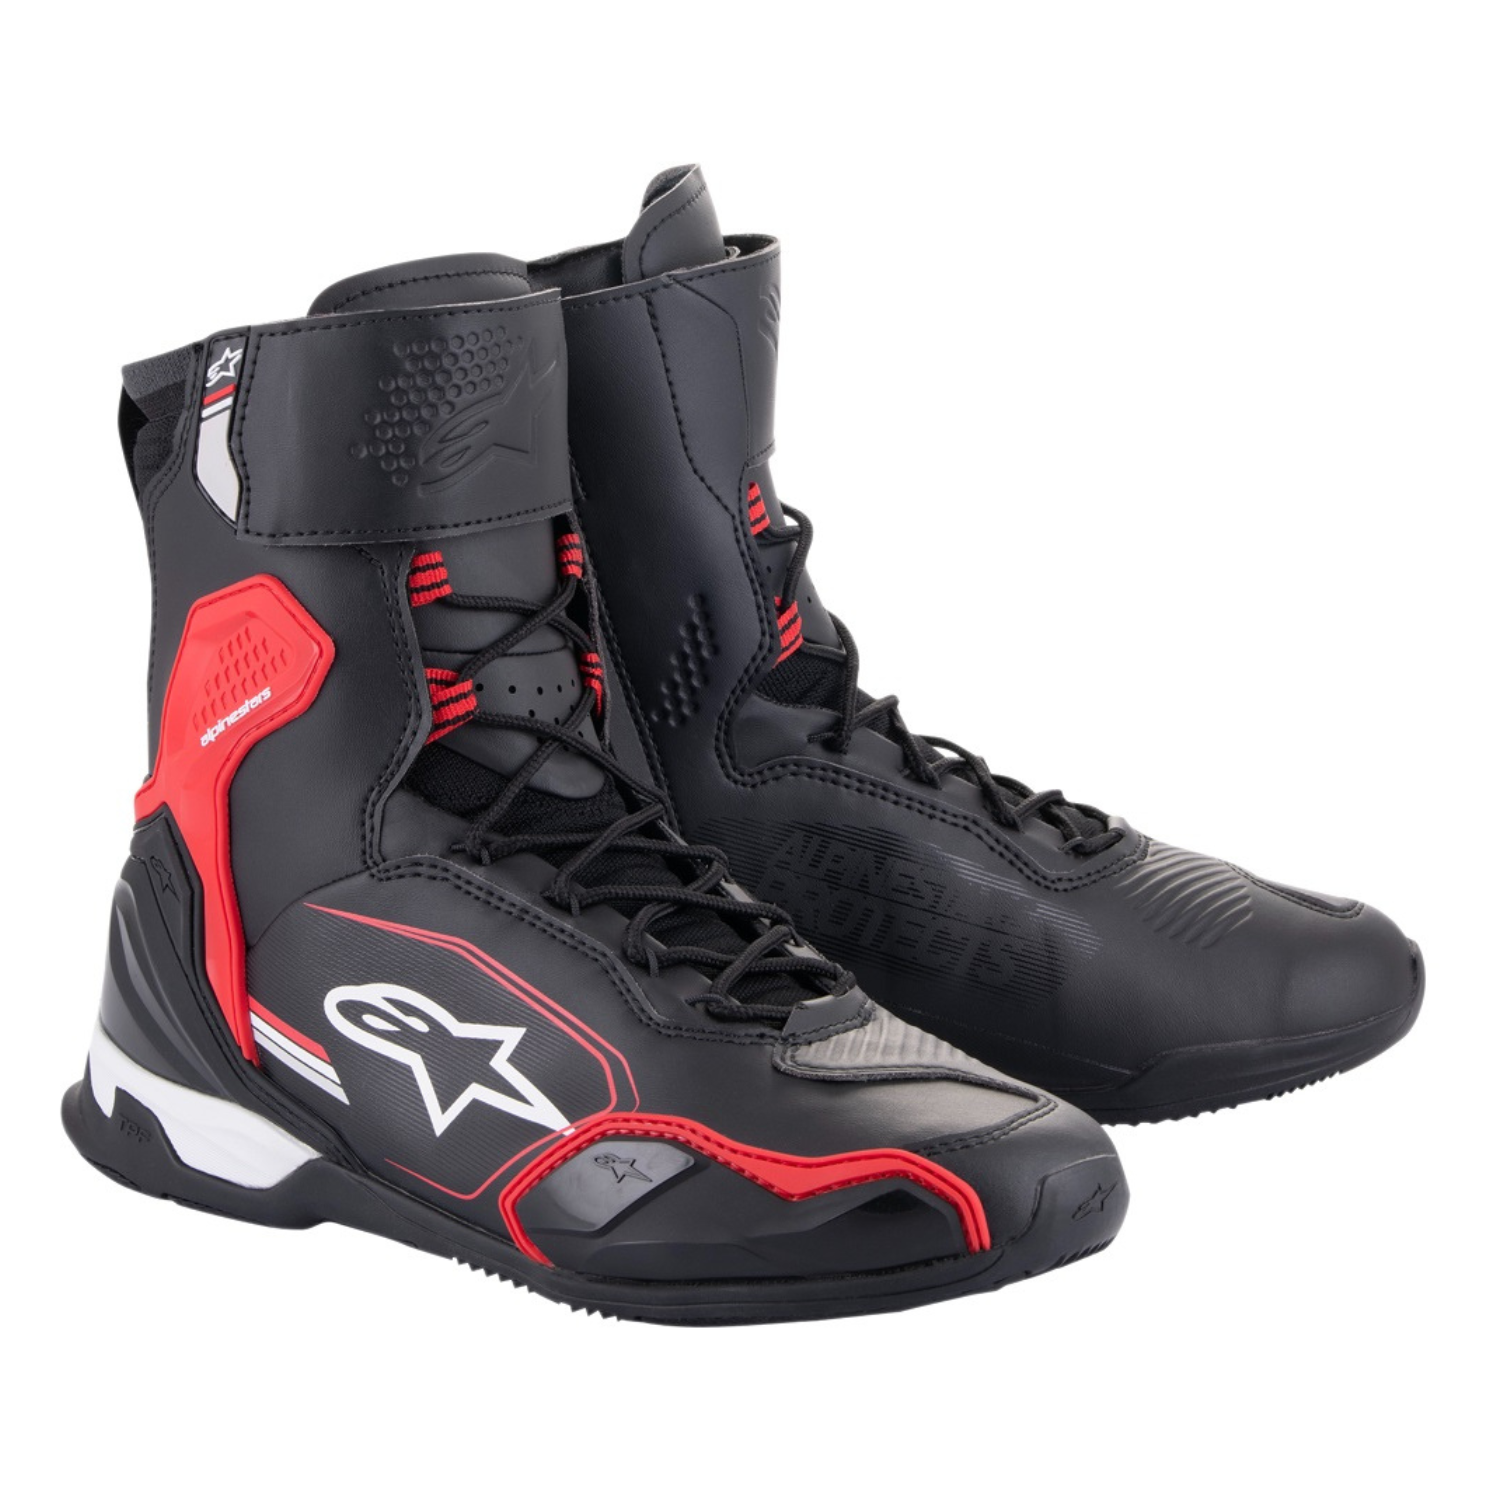 Image of Alpinestars Superfaster Shoes Black Bright Red White Talla US 85